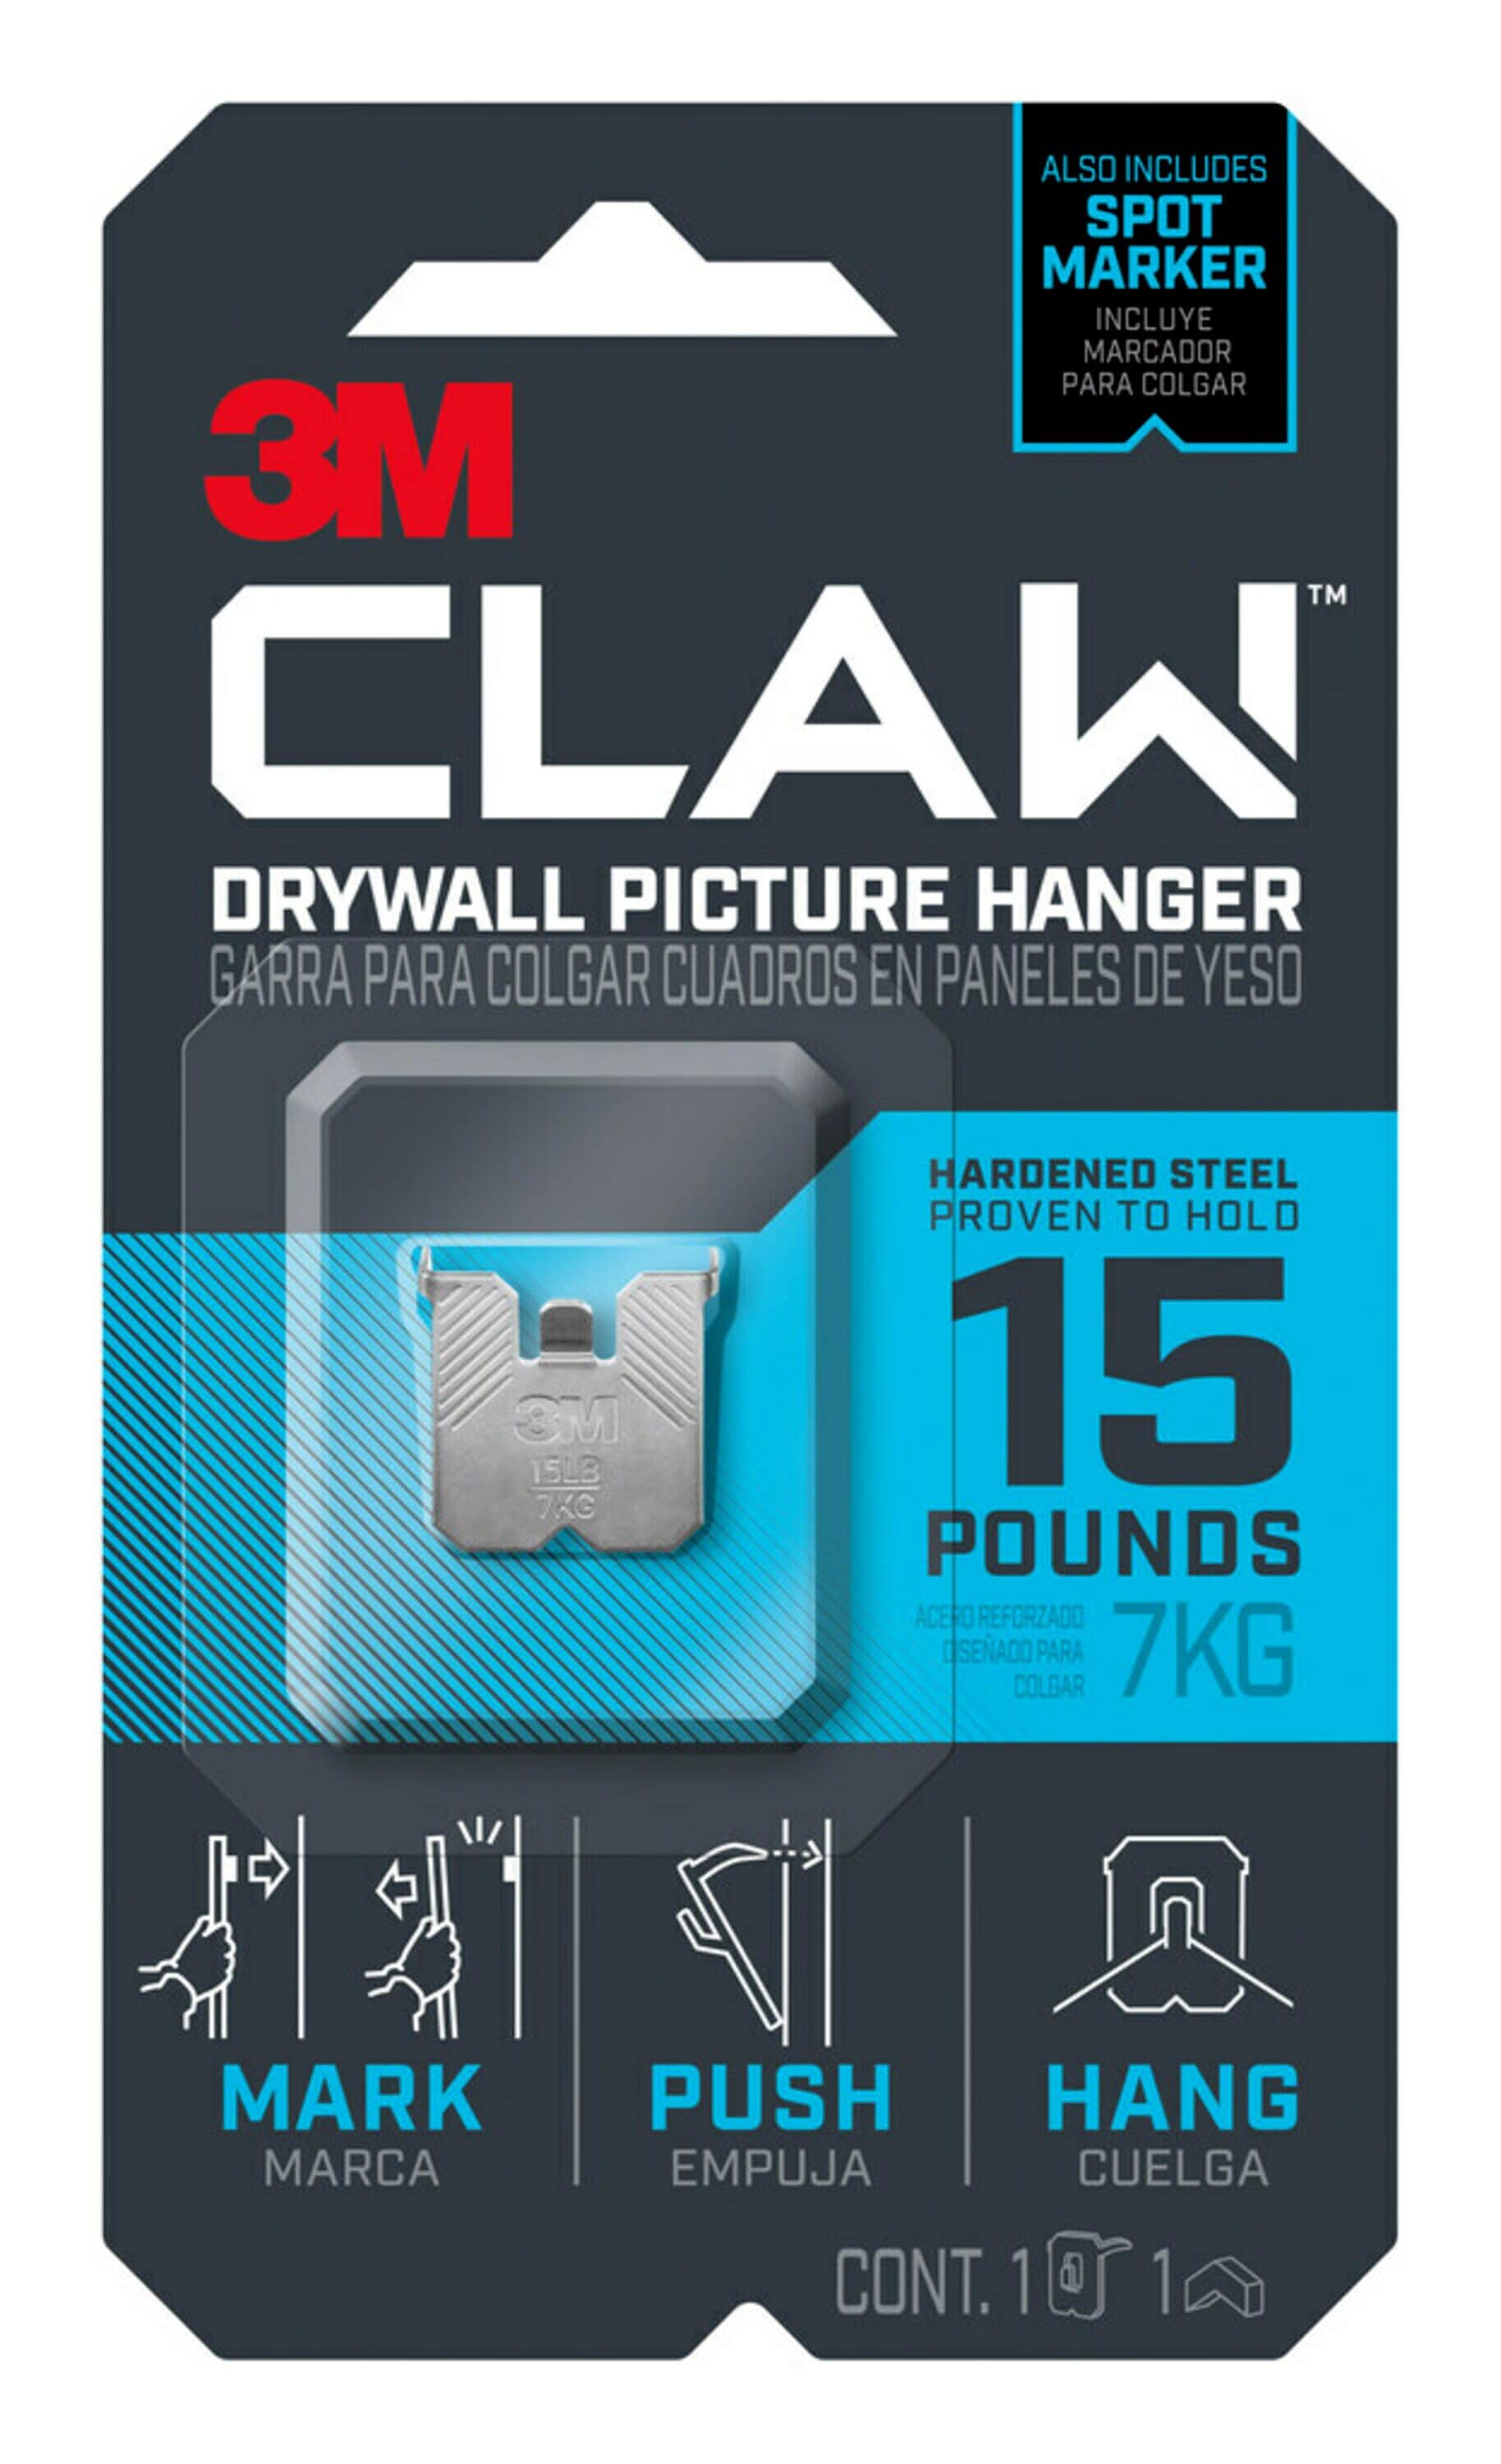 3M Claw Drywall Picture Hanger with Temporary Spot Marker, Holds 15 Lb., 5  Hangers, 5 Markers - Power Townsend Company